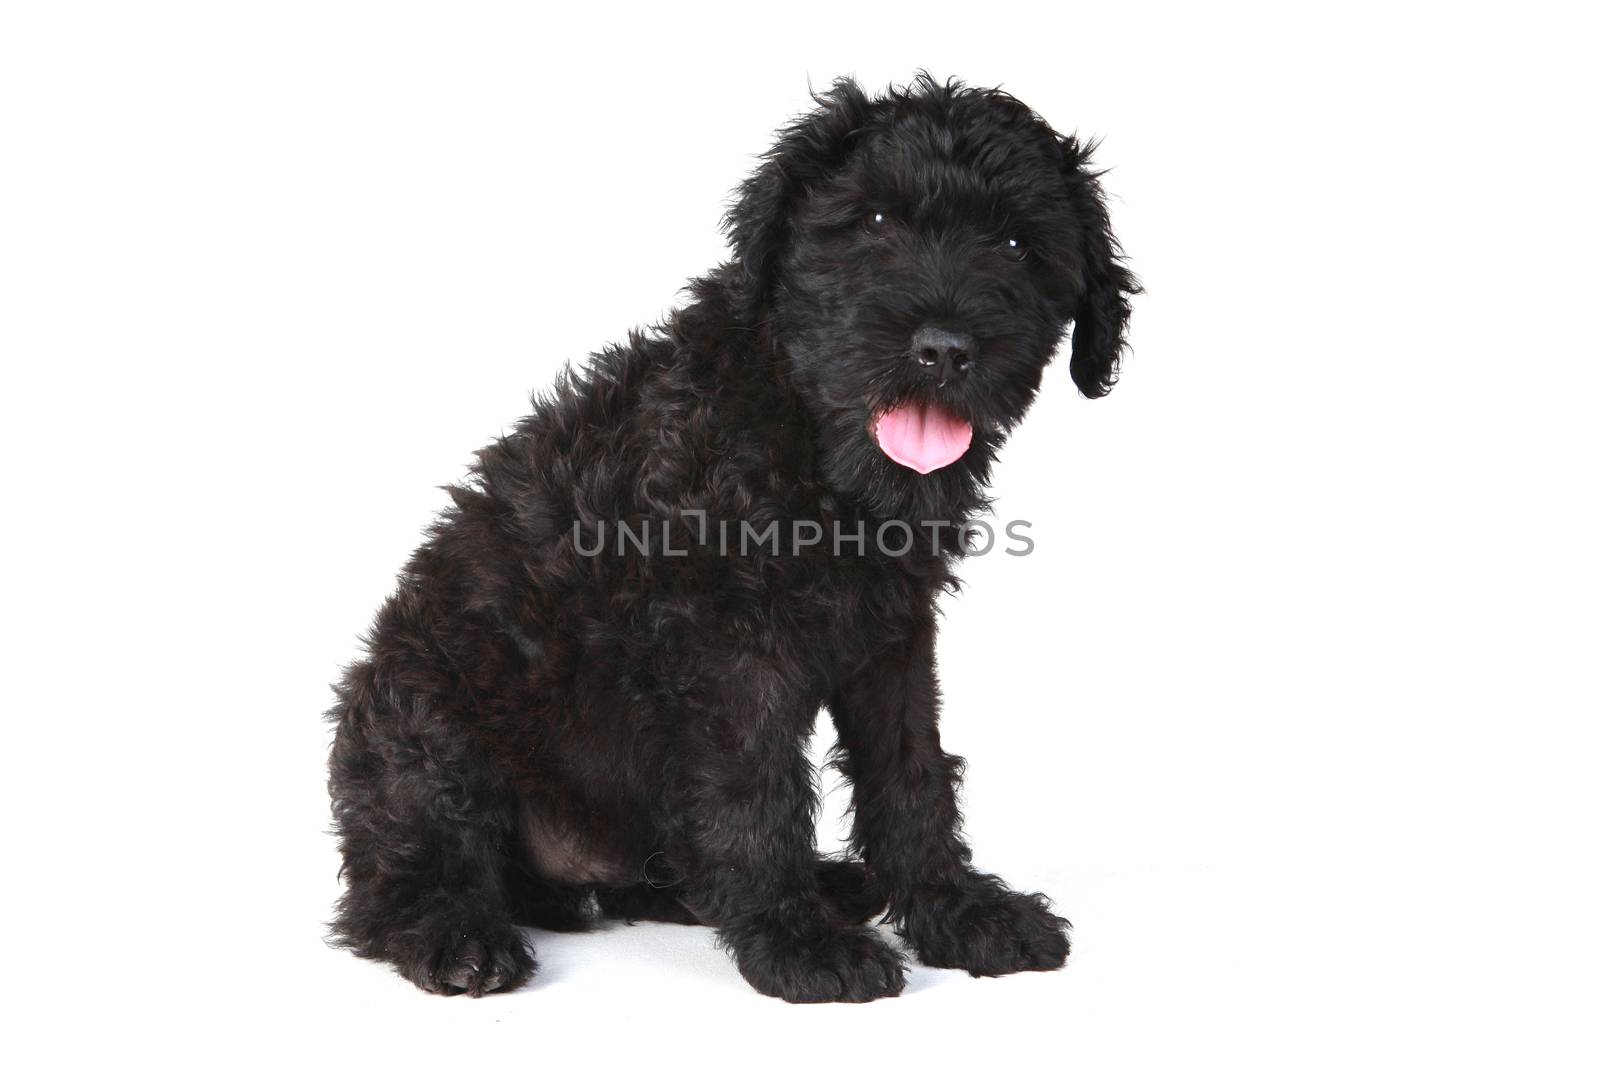 Cute Black Russian Terrier Puppy Dog on White Background by tobkatrina